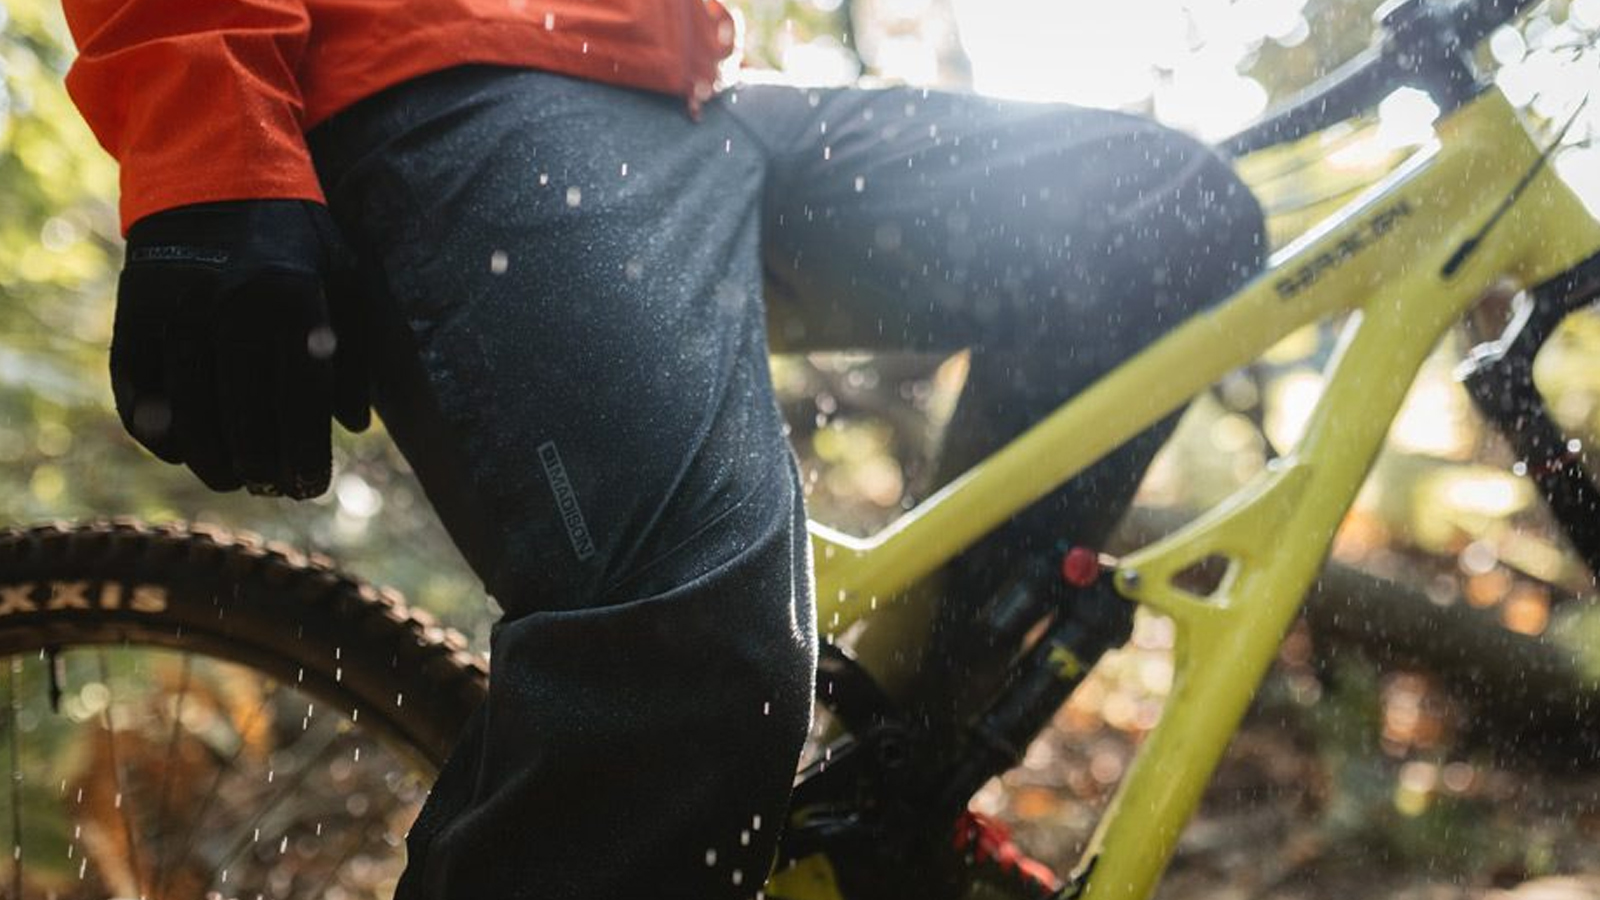 gore tex cycle trousers